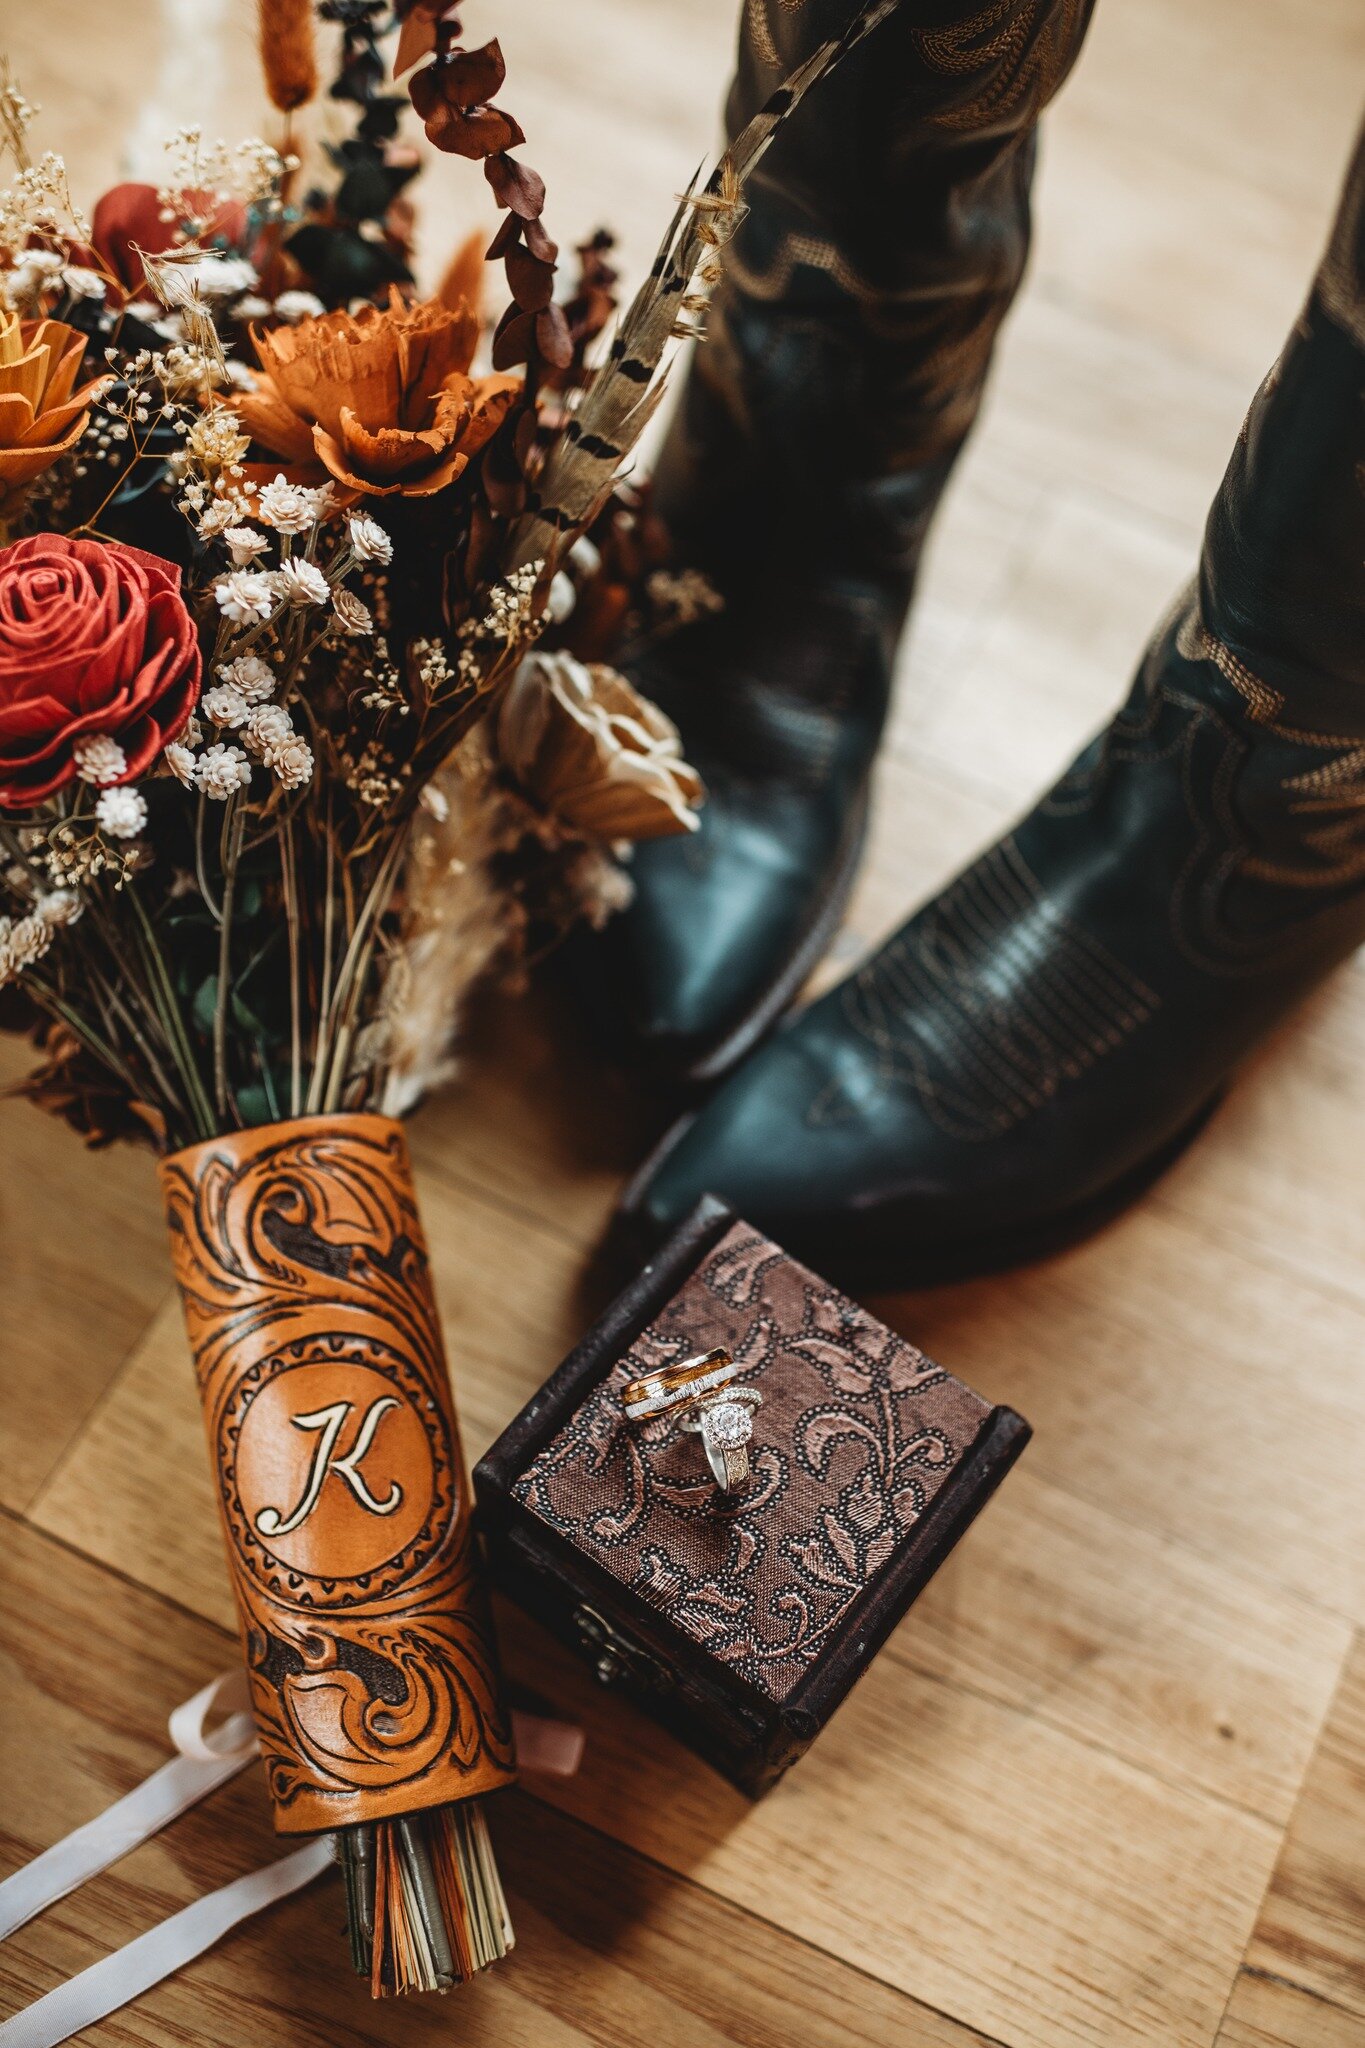 ✨Because wedding details deserve to have their moment in the spotlight too ✨

The details of Devin + Lacey's wedding. These details were everything! ❤

Venue: 81 Ranch
Photographer: The Turquoise Lens - western lifestyle photography 
Florist: All Thi